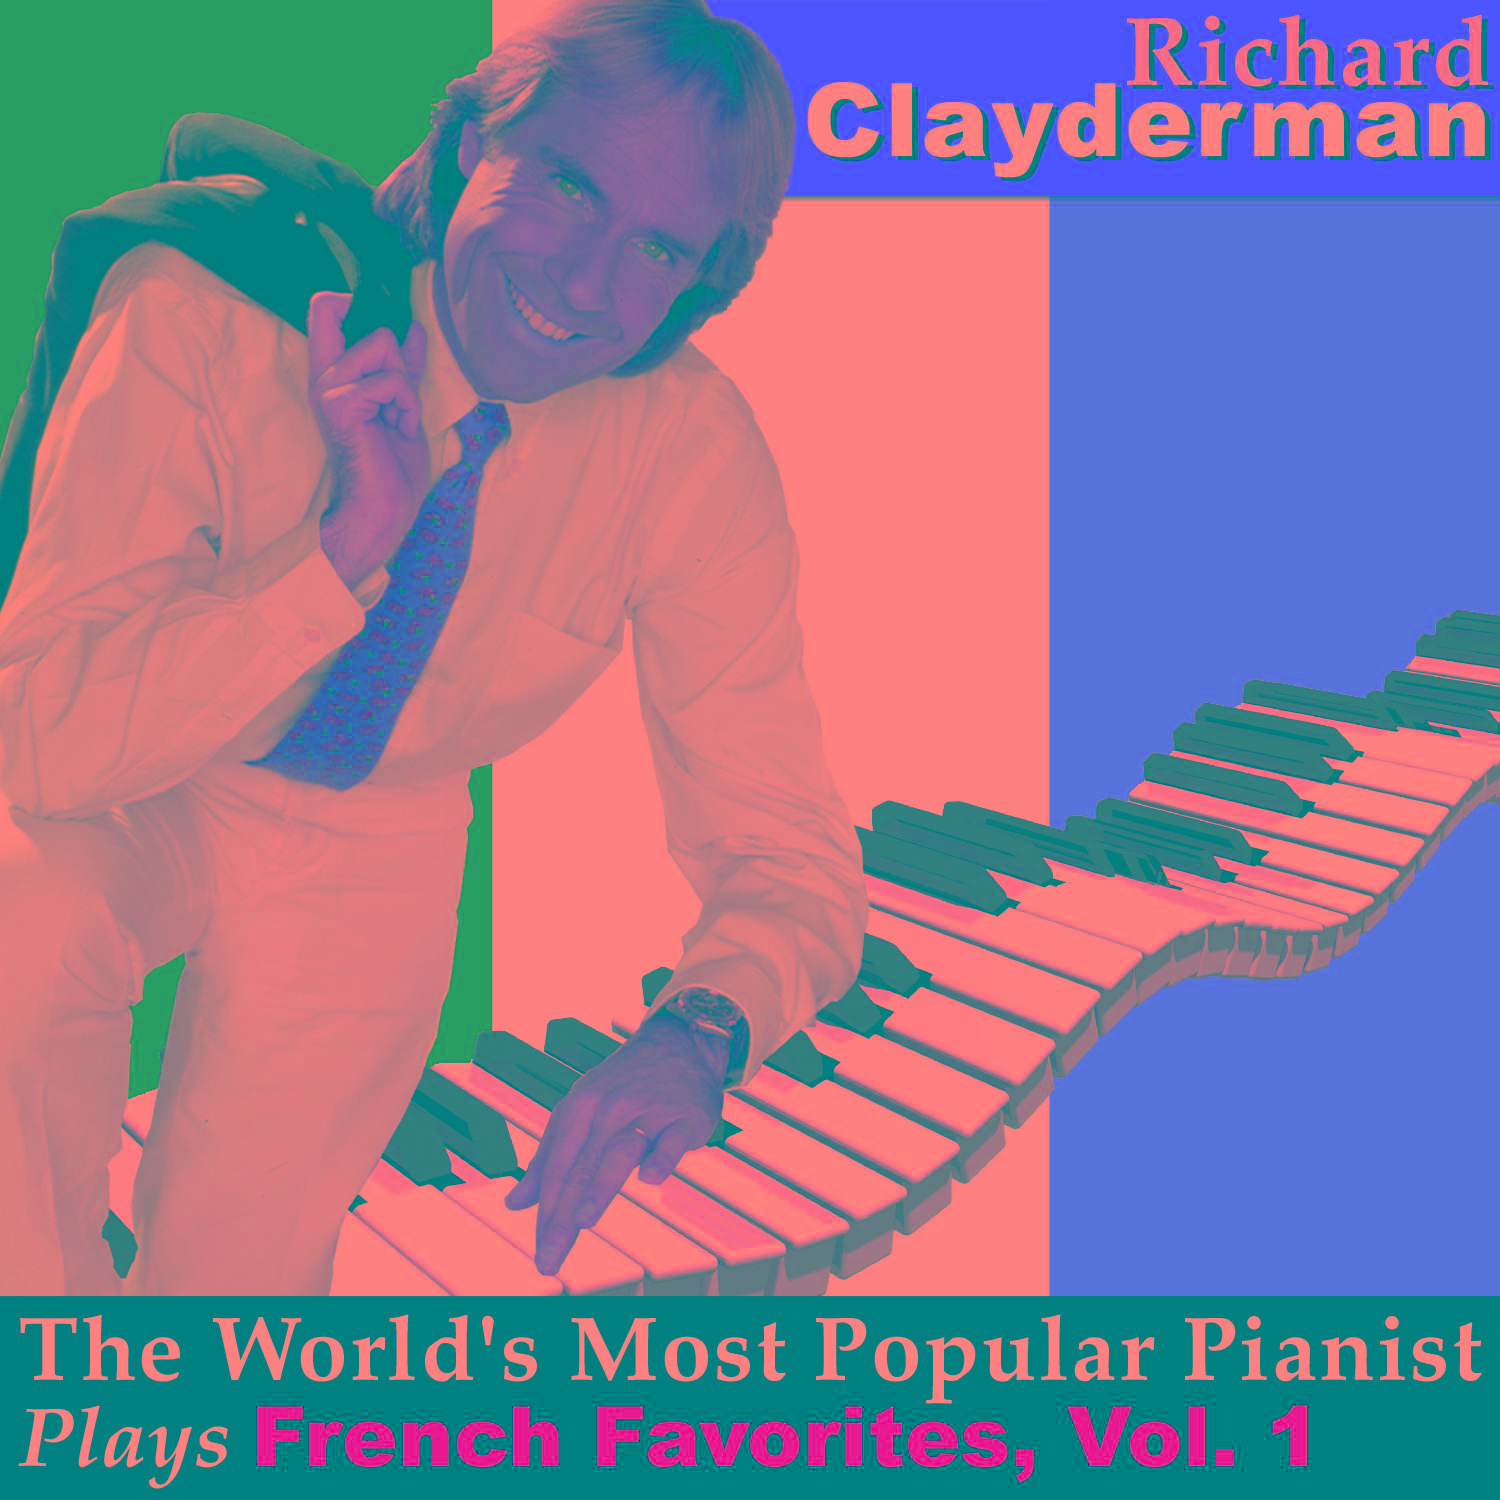 The World's Most Popular Pianist Plays French Favorites, Vol. 1